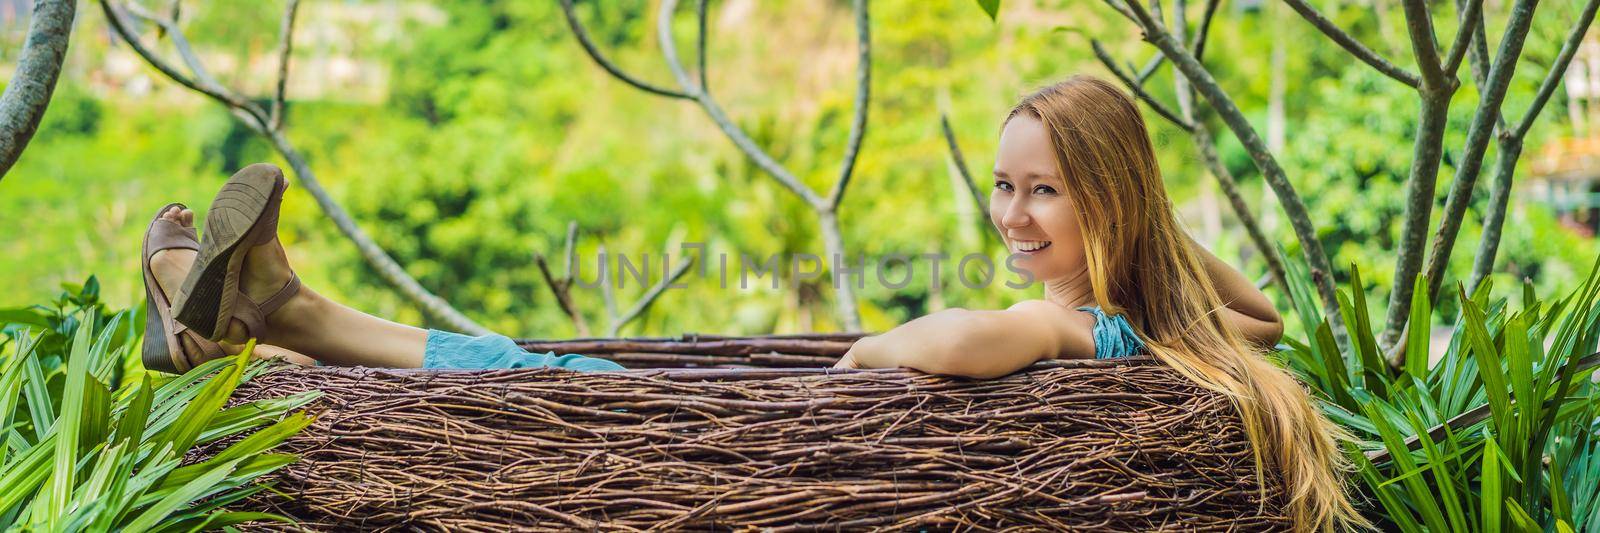 BANNER, LONG FORMAT Bali trend, straw nests everywhere. Young tourist enjoying her travel around Bali island, Indonesia. Making a stop on a beautiful hill. Photo in a straw nest, natural environment. Lifestyle.